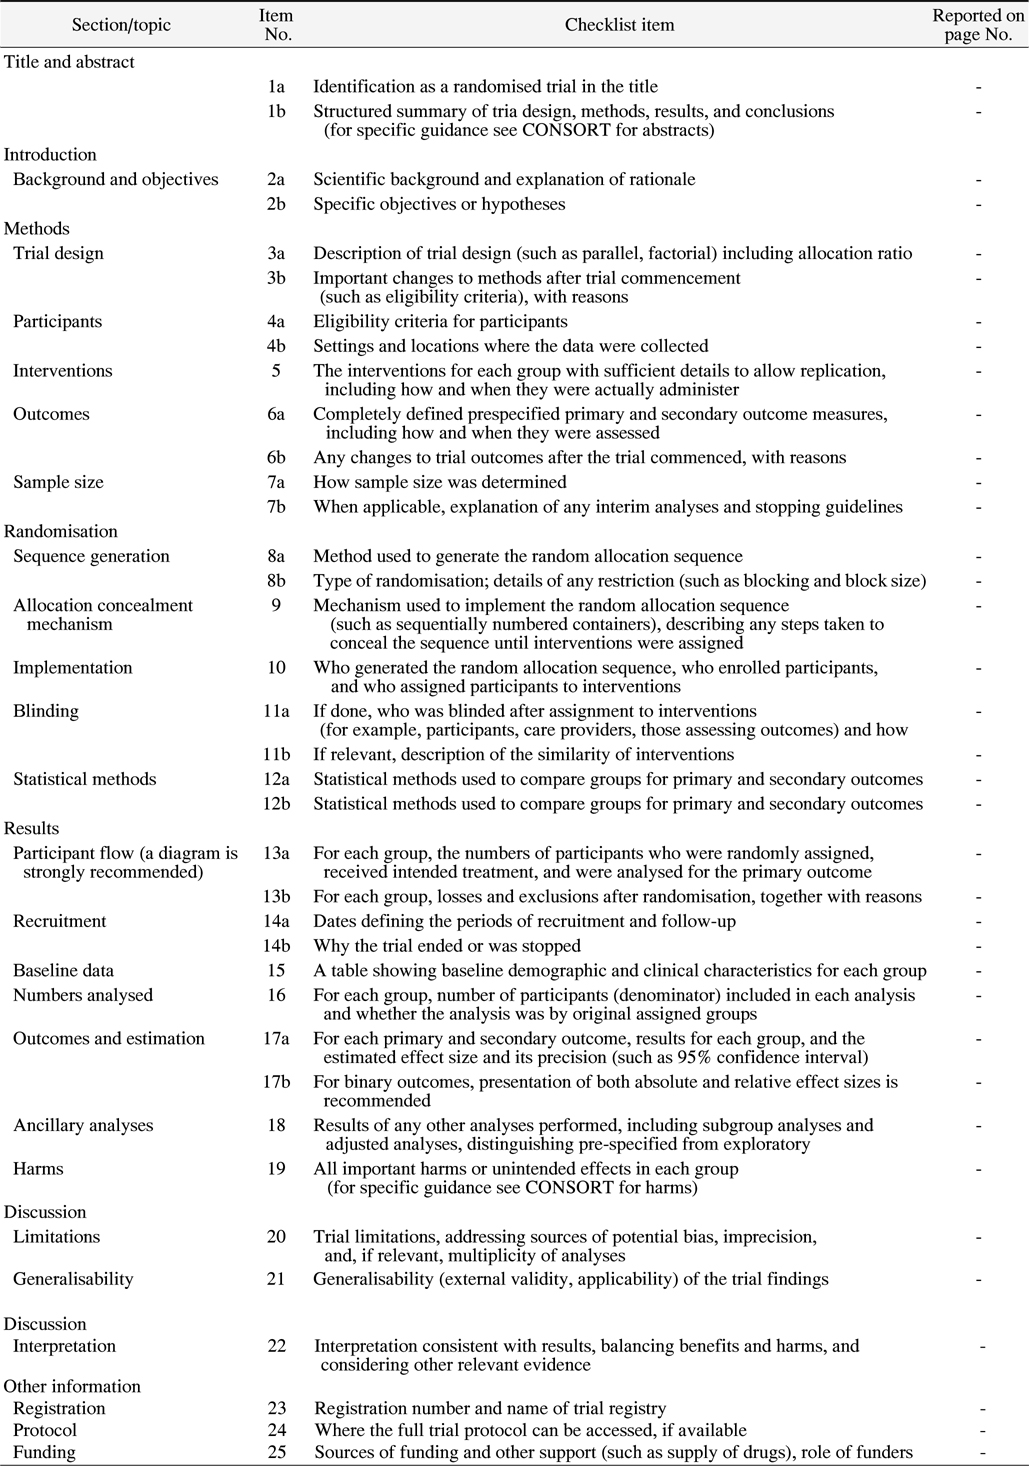 CONSORT 2010 Checklist of Information to include when Reporting a Randomised Trial